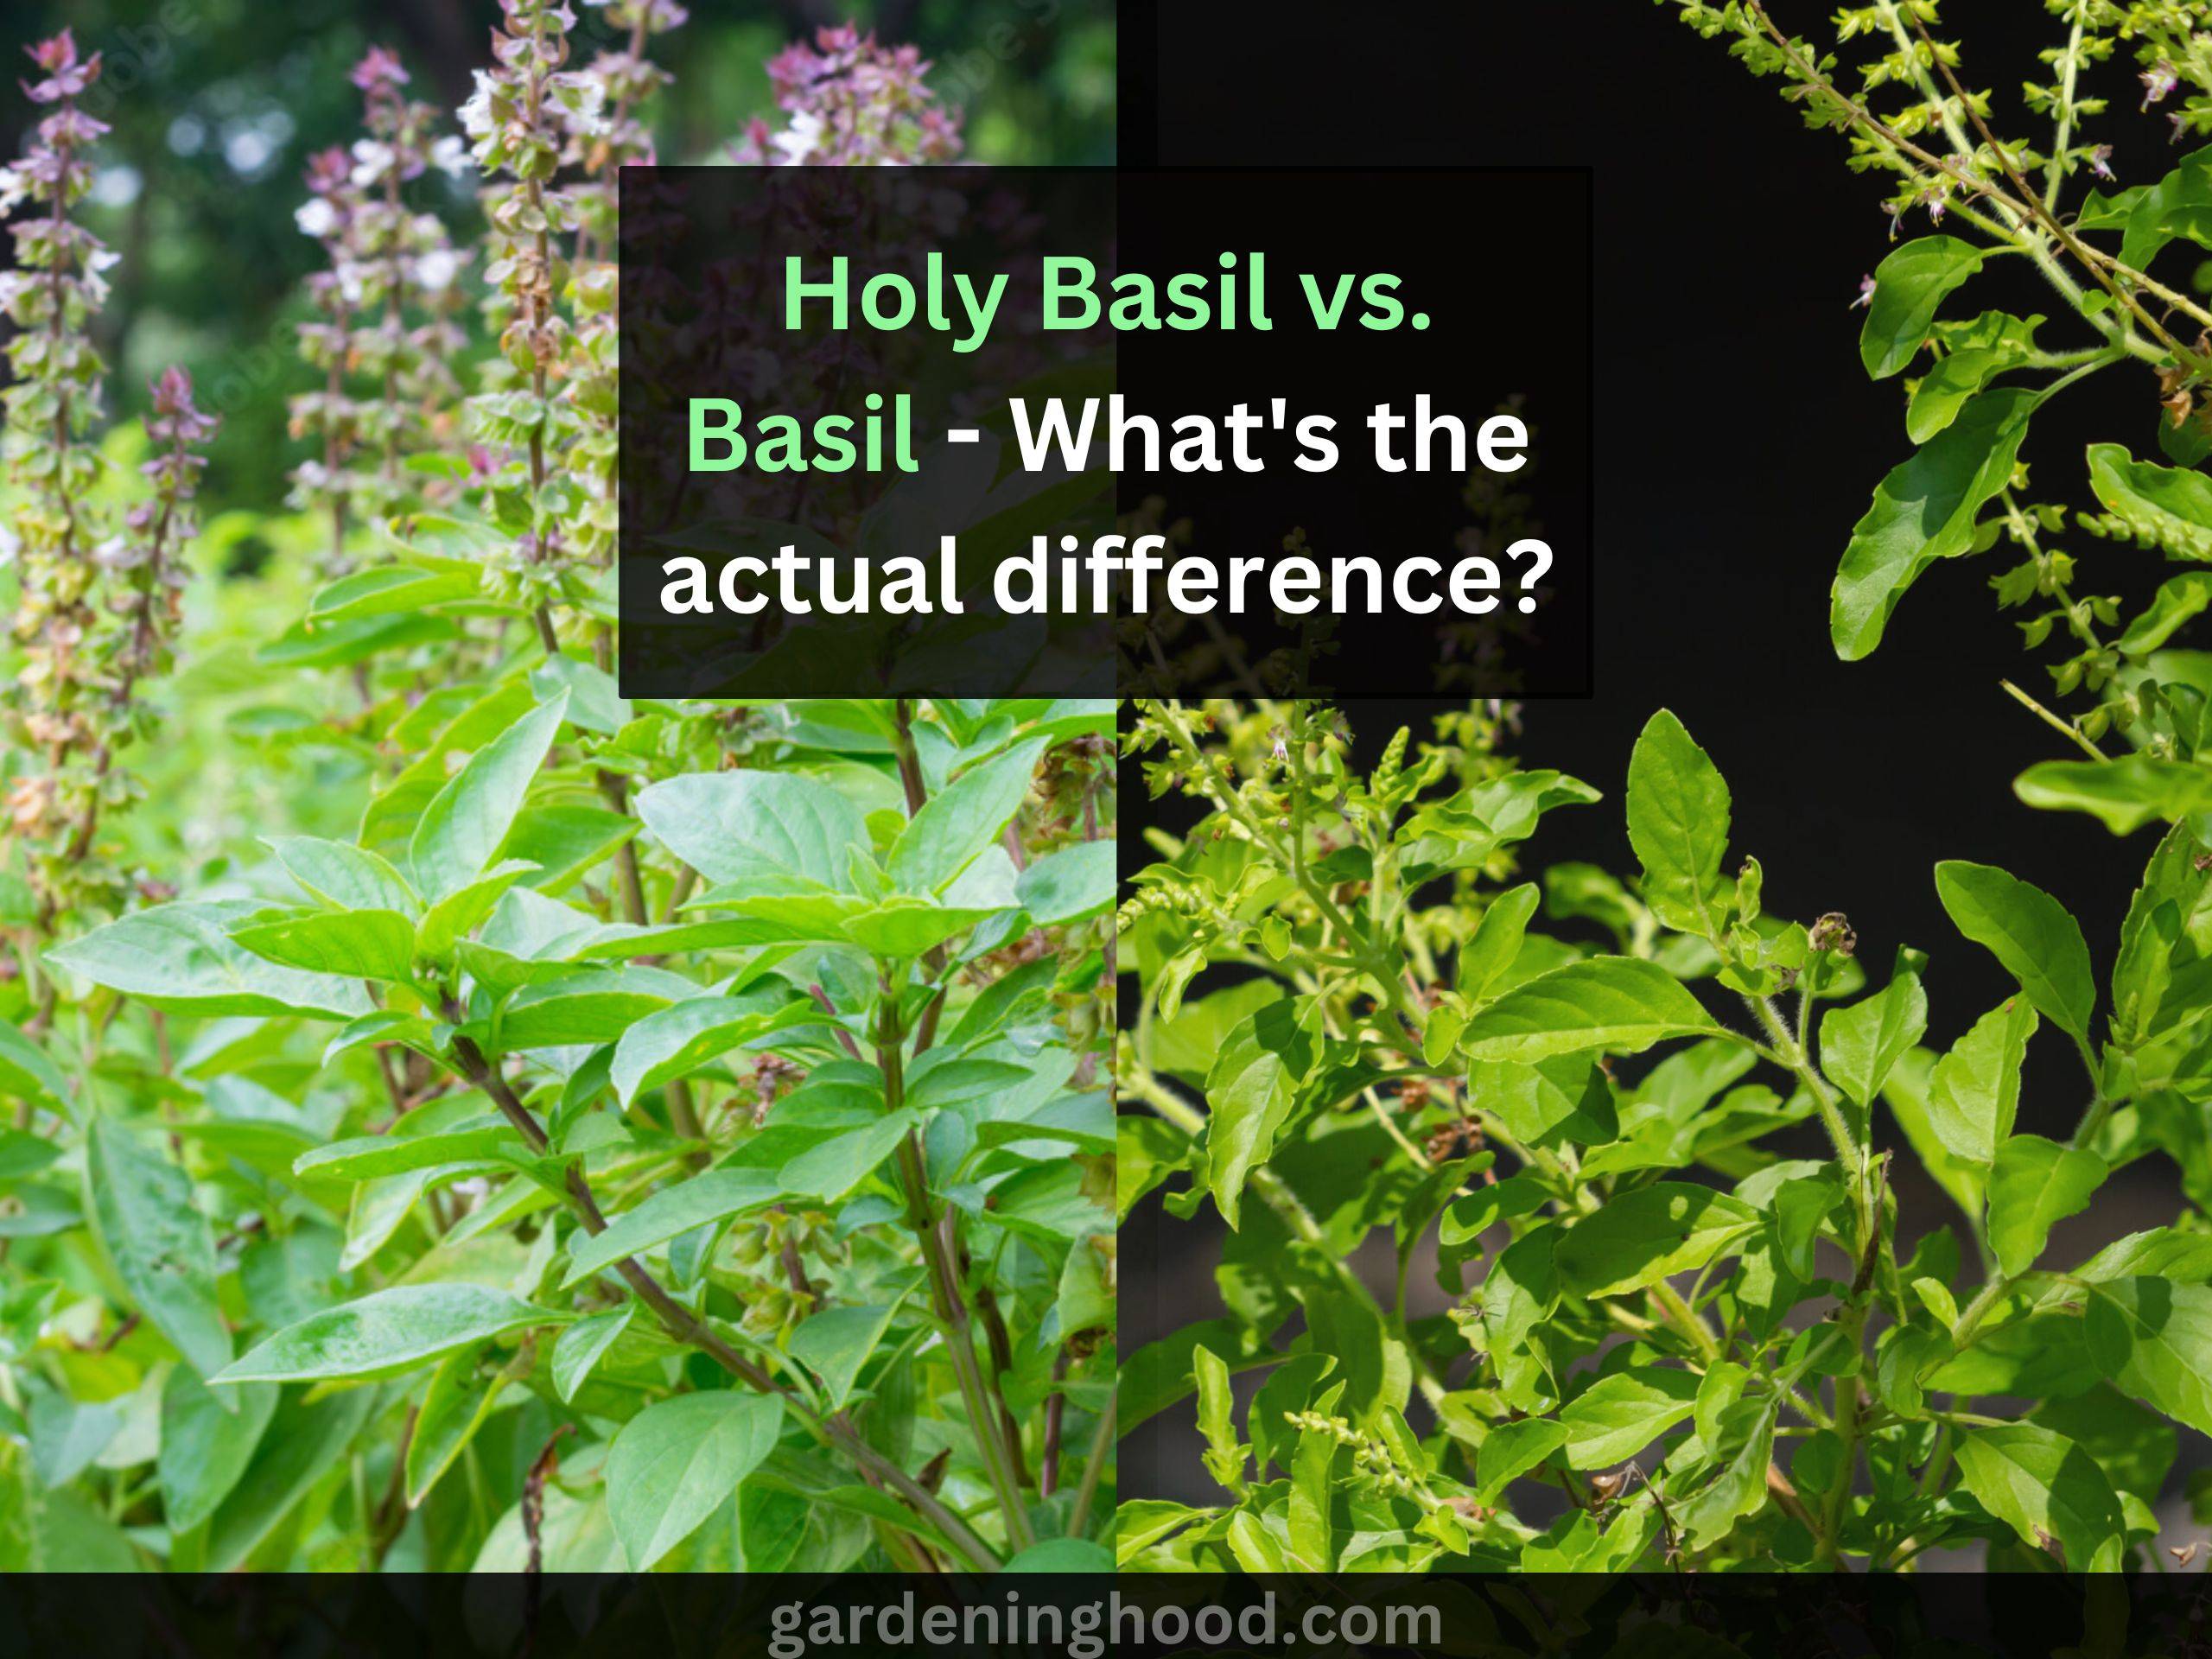 Holy Basil vs. Basil - What's the actual difference?